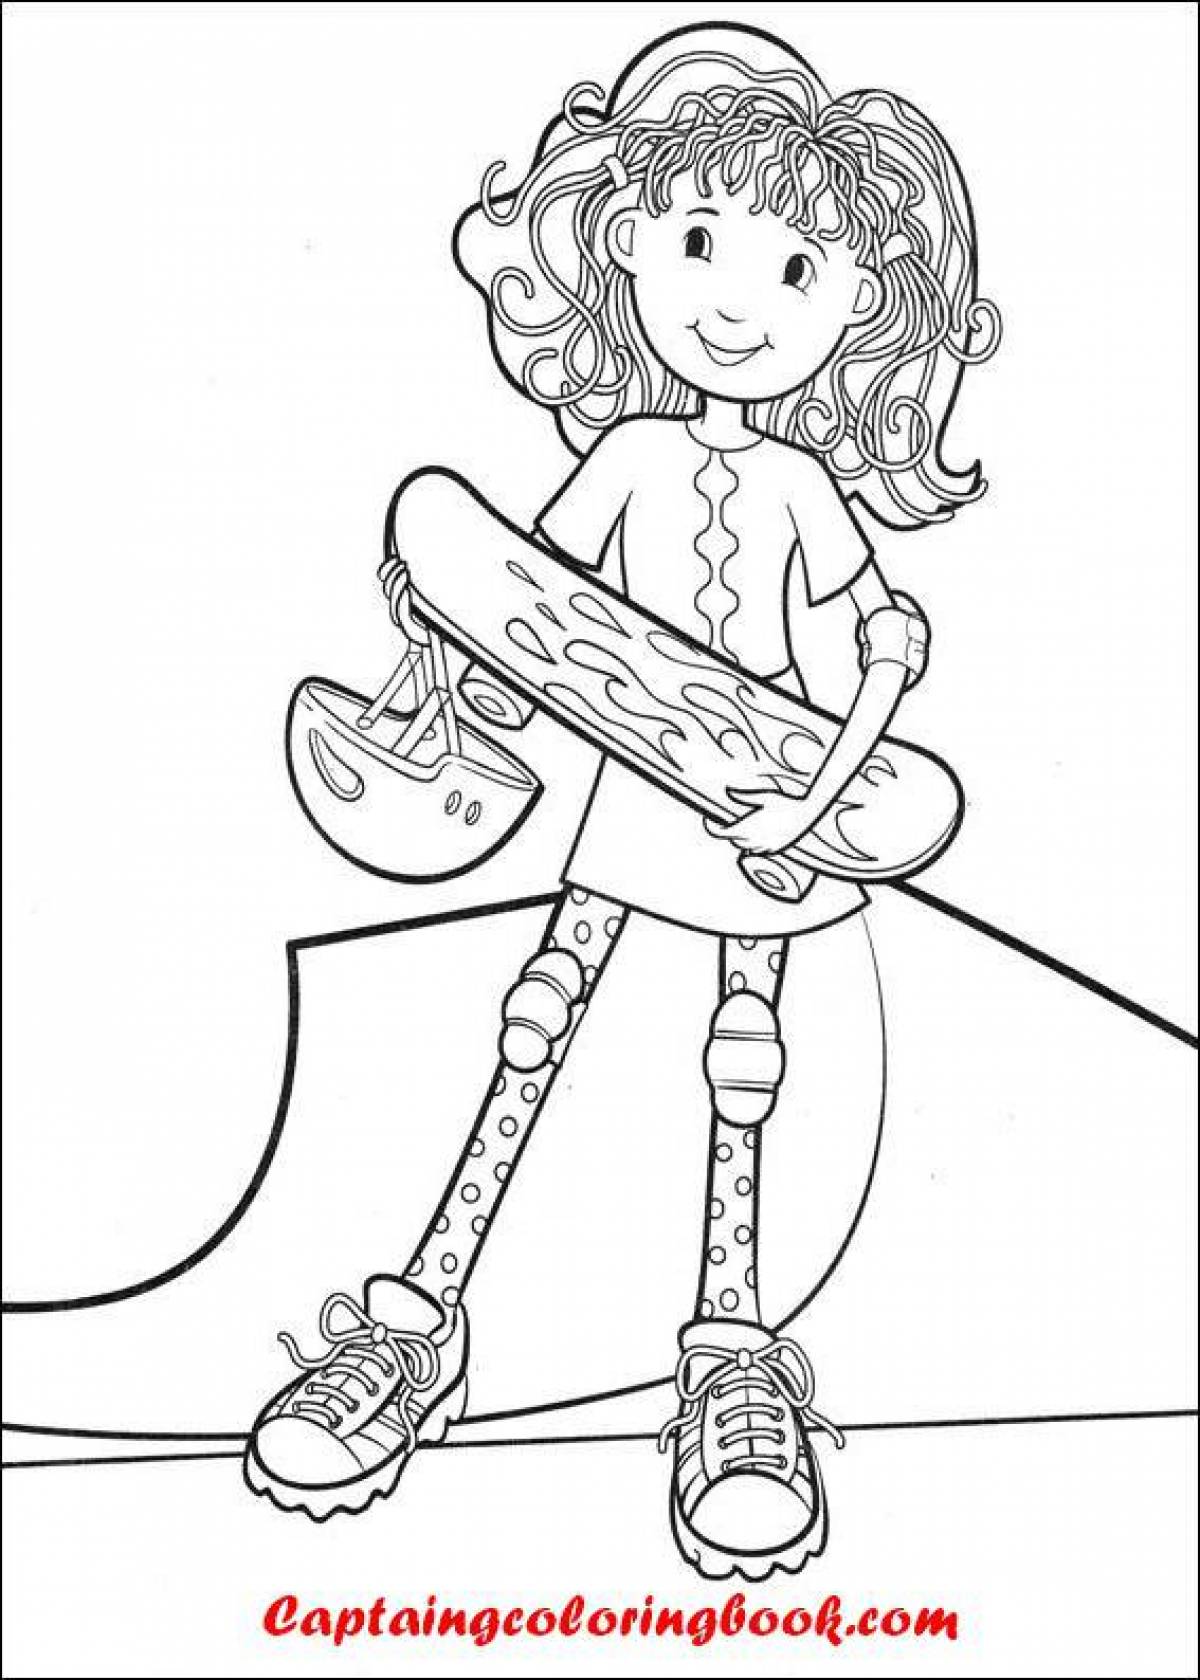 Glowing poppy coloring page